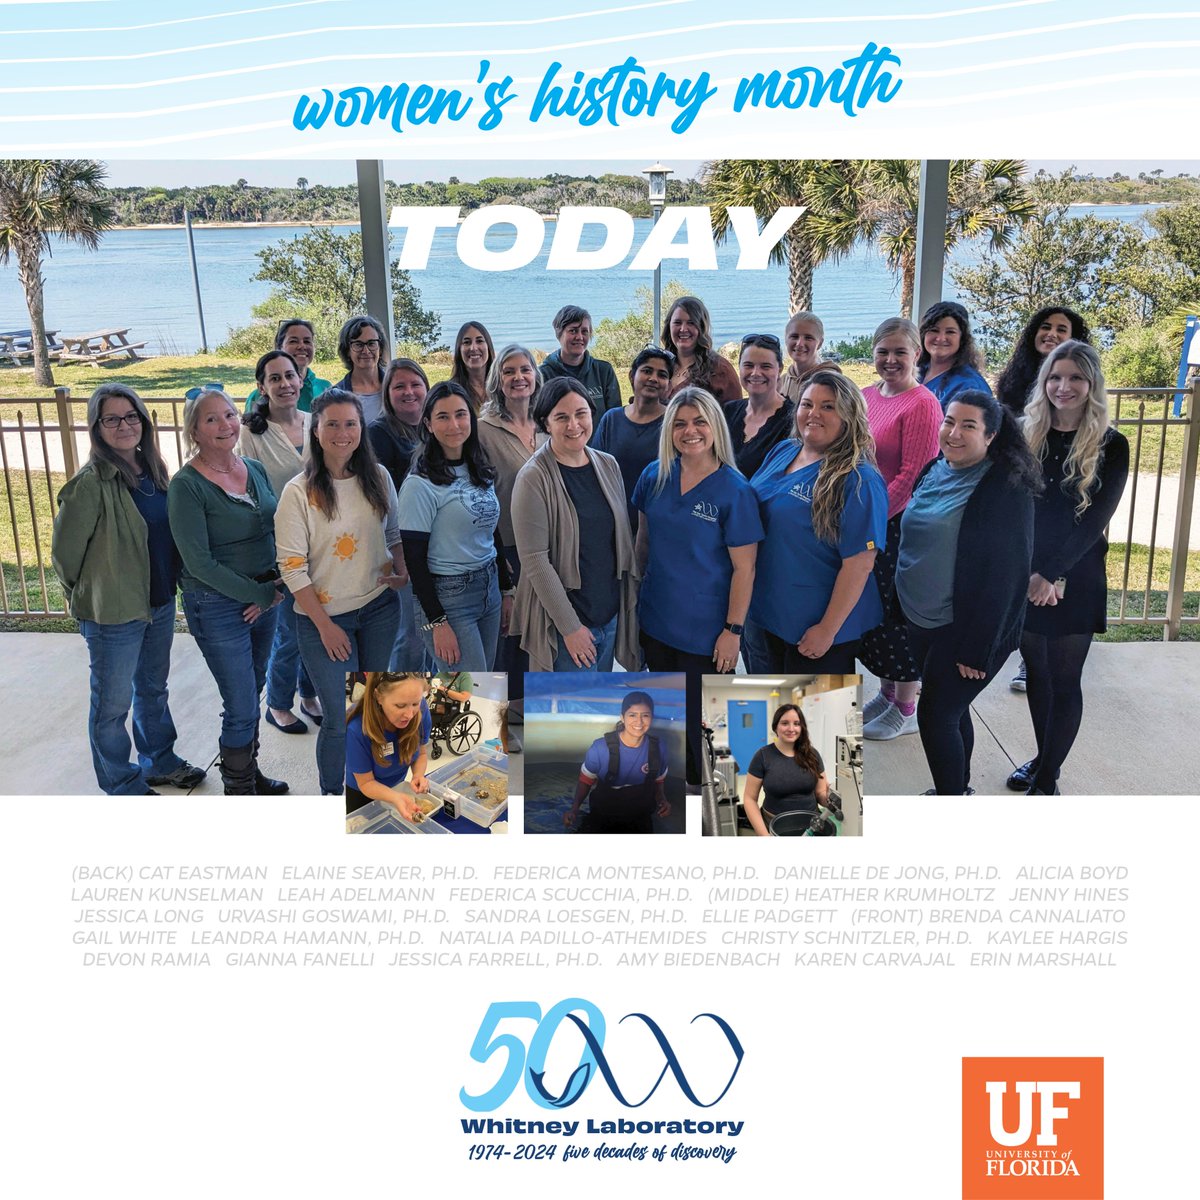 Groundbreaking science stems from the roots of previous research. This #WomensHistoryMonth, we’ve shared highlights through 50 years of the Whitney Lab. For our final post, we wanted to celebrate the #WomenInScience making history today. Learn more 👉 whitney.ufl.edu